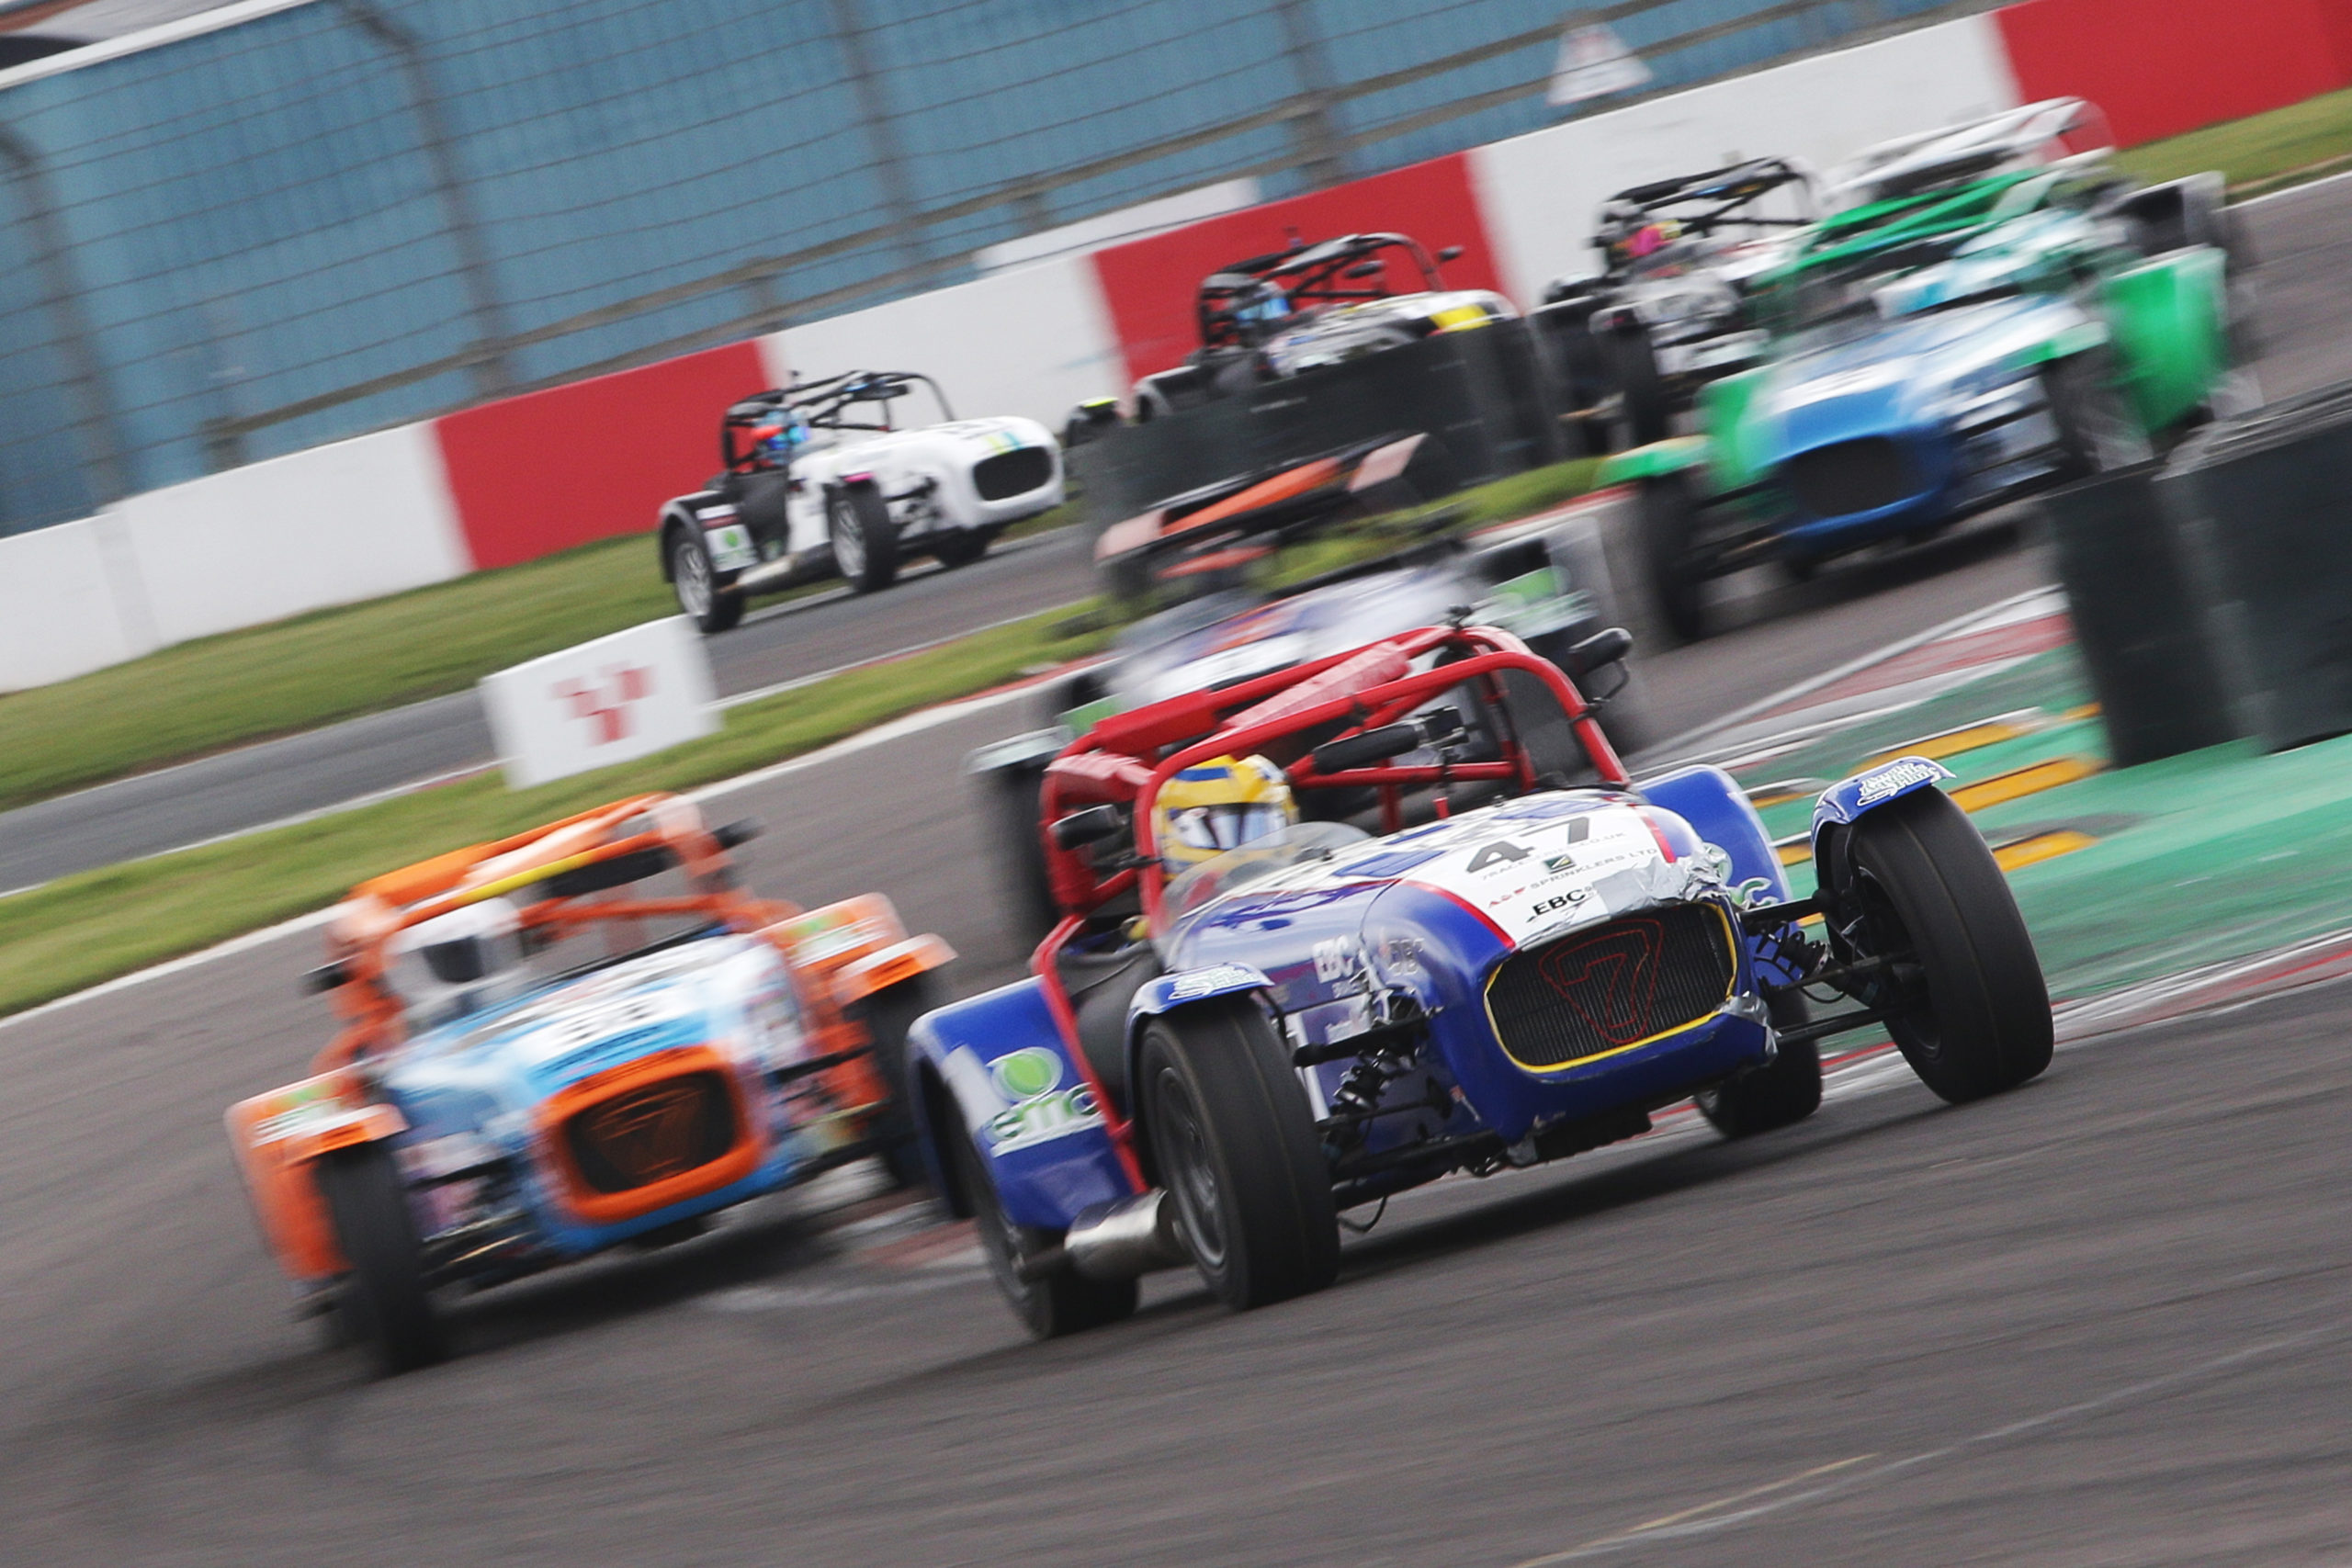 EBC-Equipped Caterham Racer Completes First Round of 2022 Toyo Tires 7 Race Series